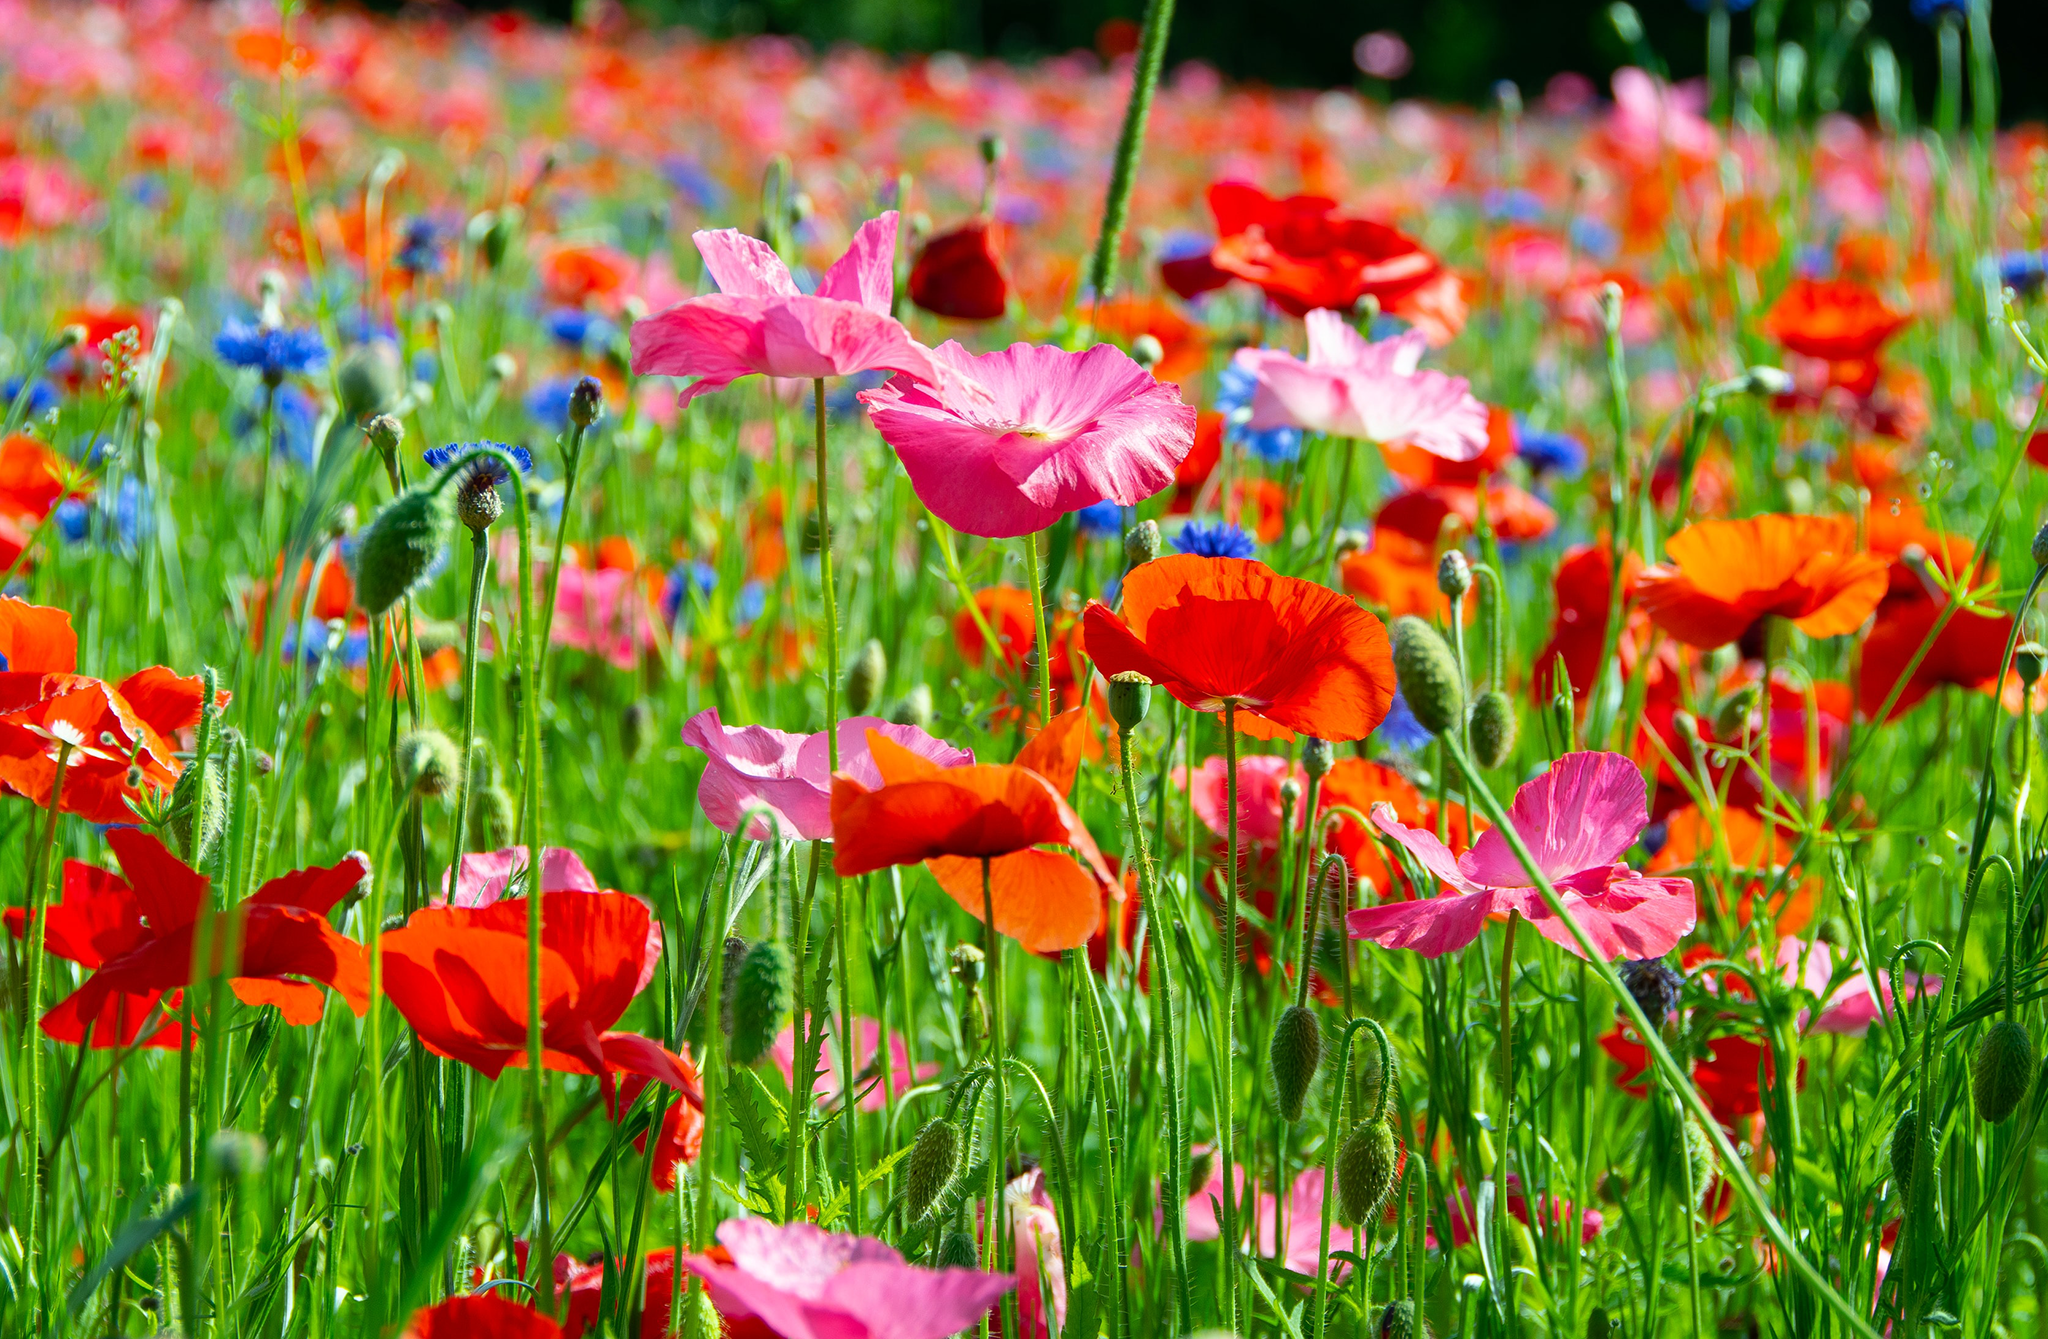 A field of bright red and pink poppies